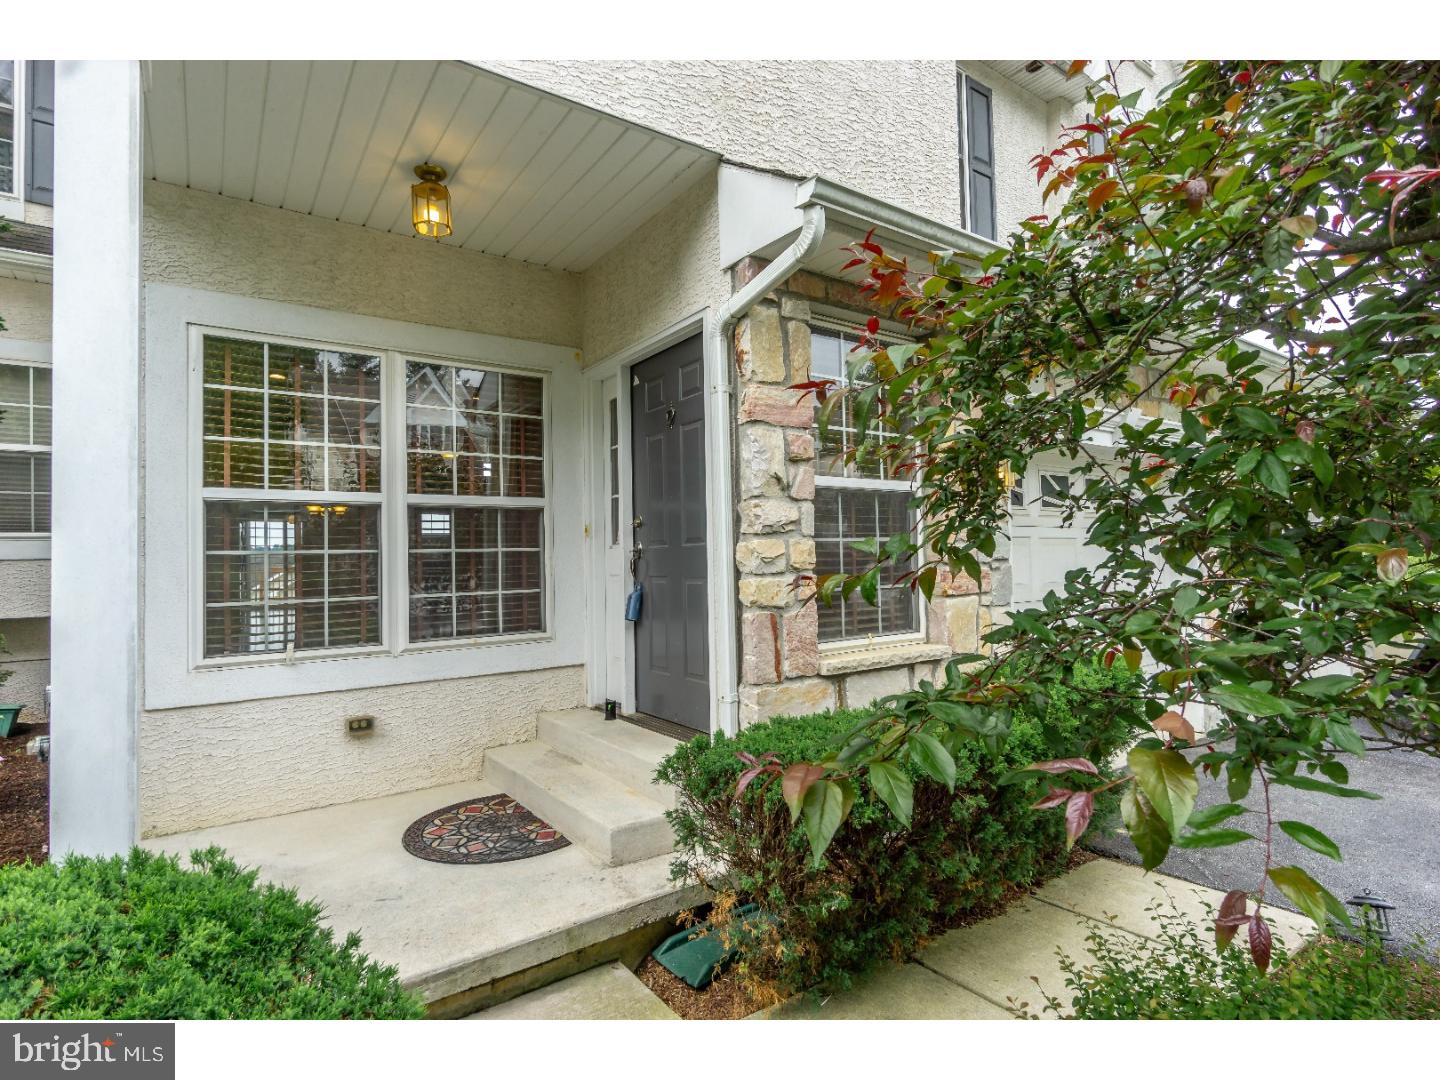 View Downingtown, PA 19335 townhome